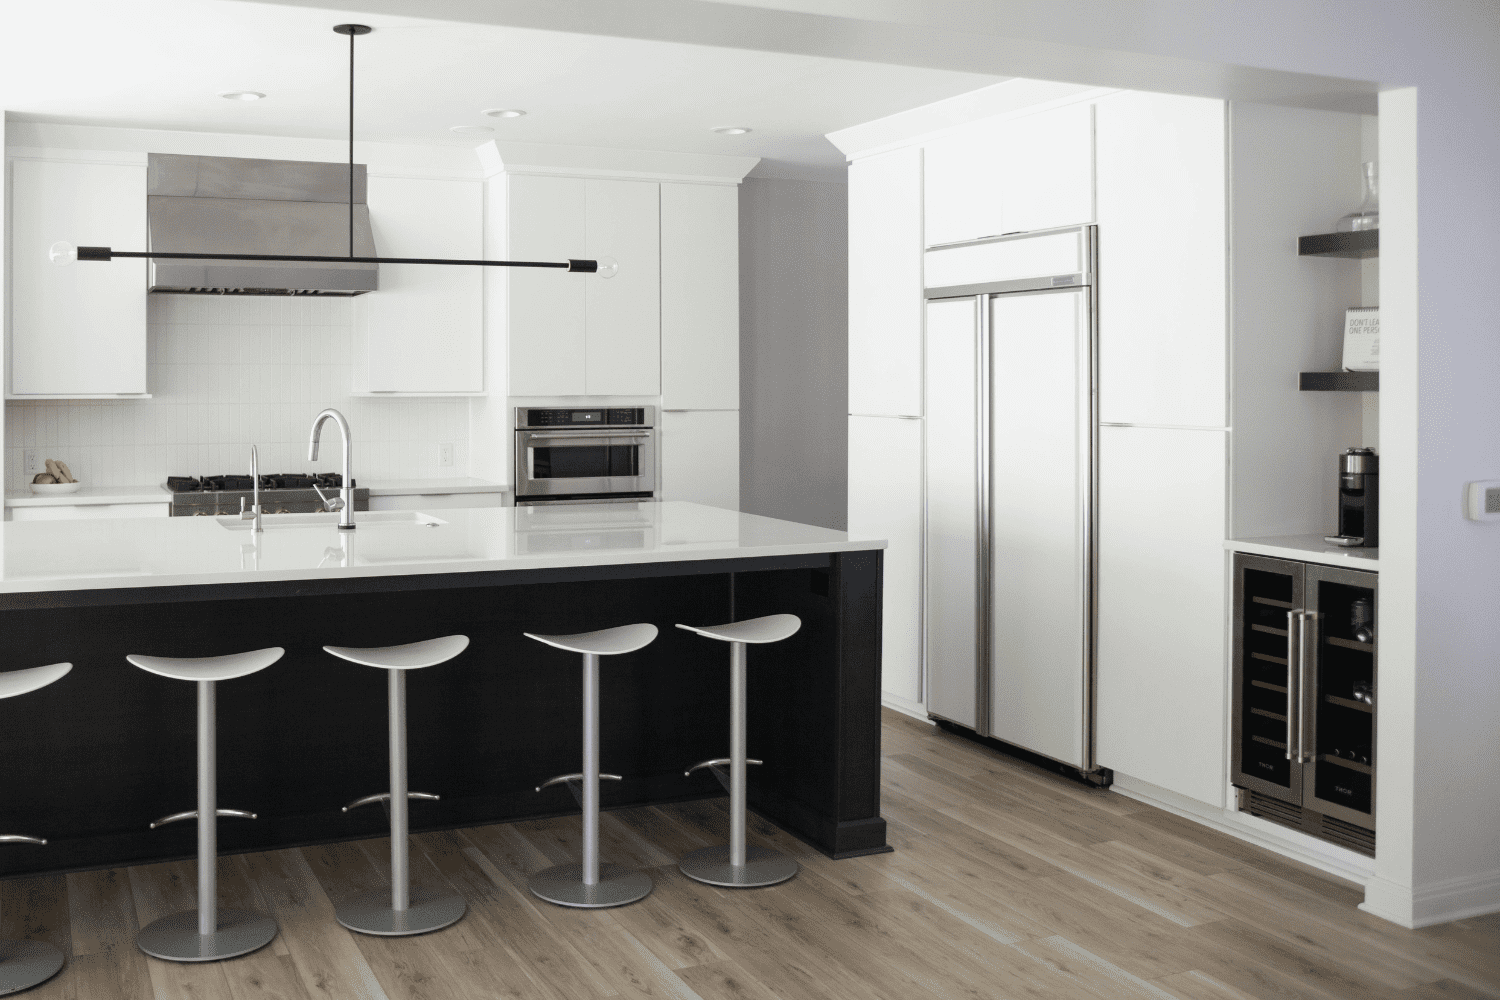 Nicholas Design Build | A black and white kitchen with stools.